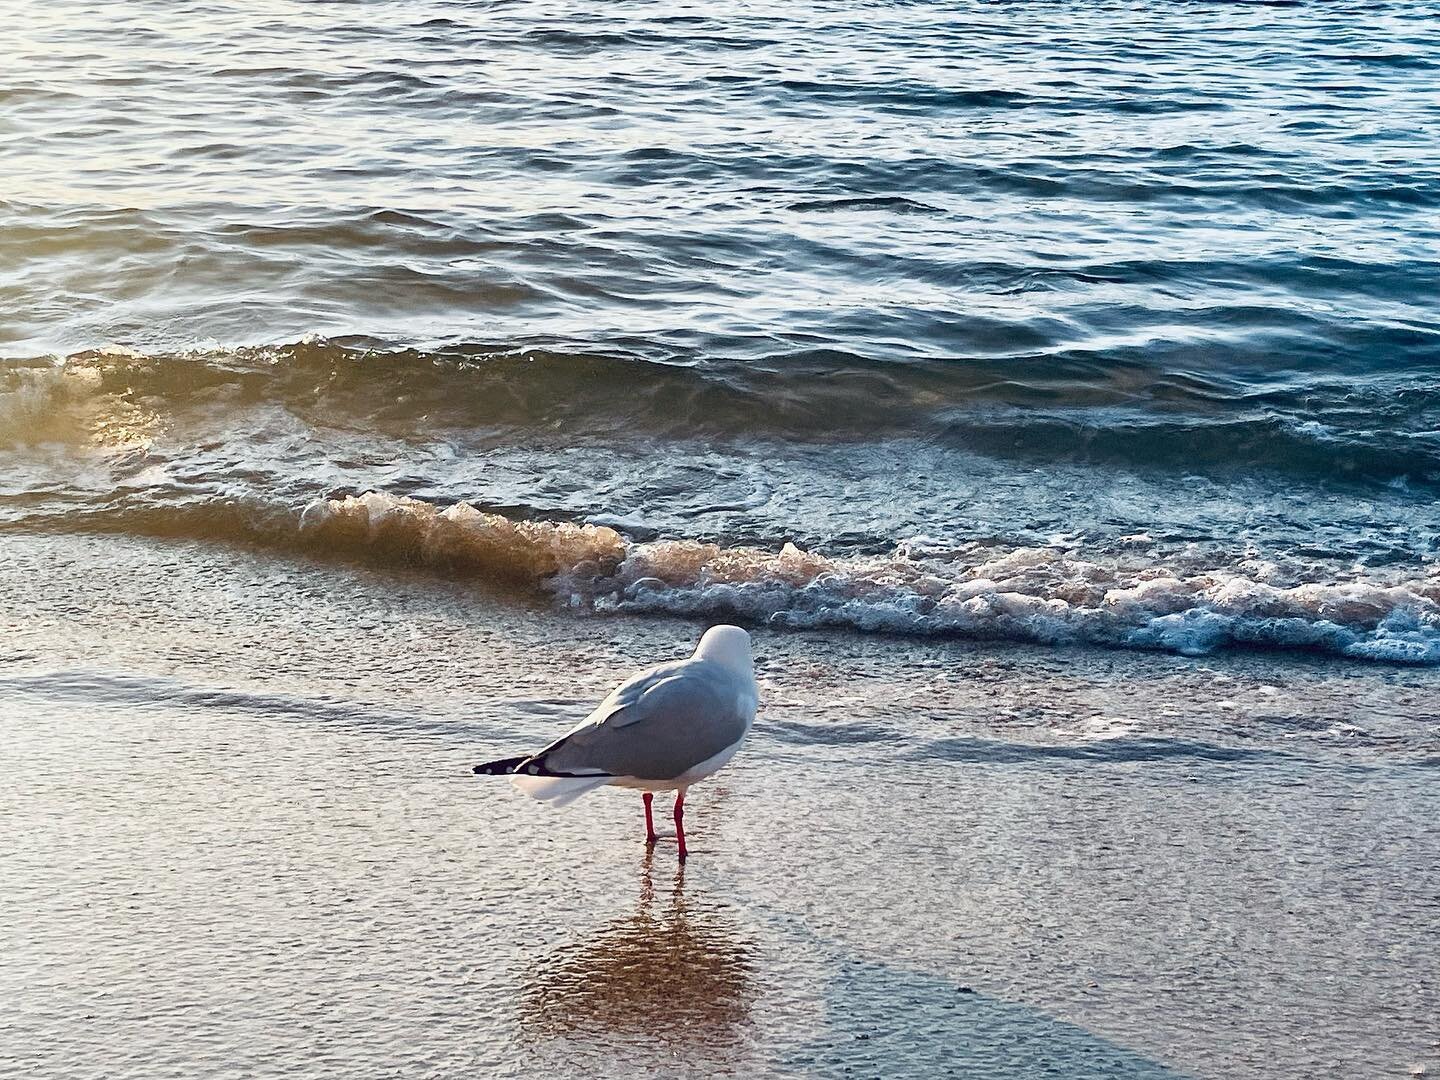 Still wondering what this guy was thinking about this morning. Can seagulls have an existential crisis?
.

#writer #author #seagulls #beachlife #balmoralmornings #storytime